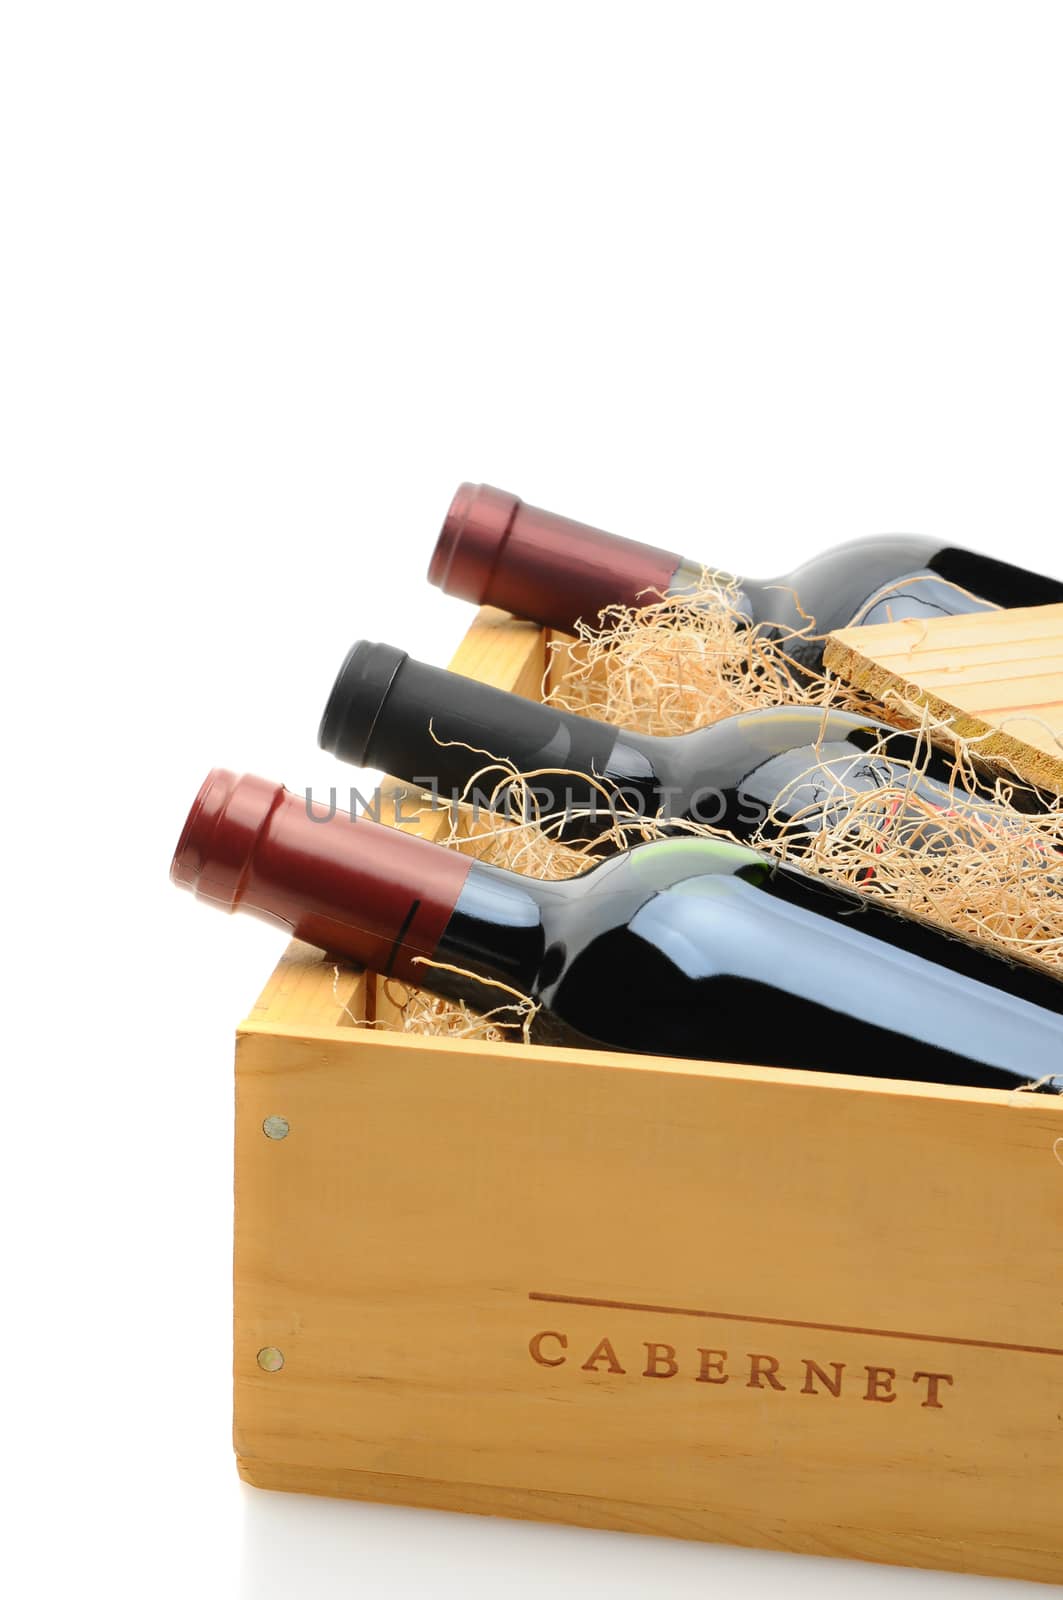 Closeup of three red wine bottles in a wooden shipping crate. The crate is partially open with excelsior packing. Vertical format over a white background with reflection.